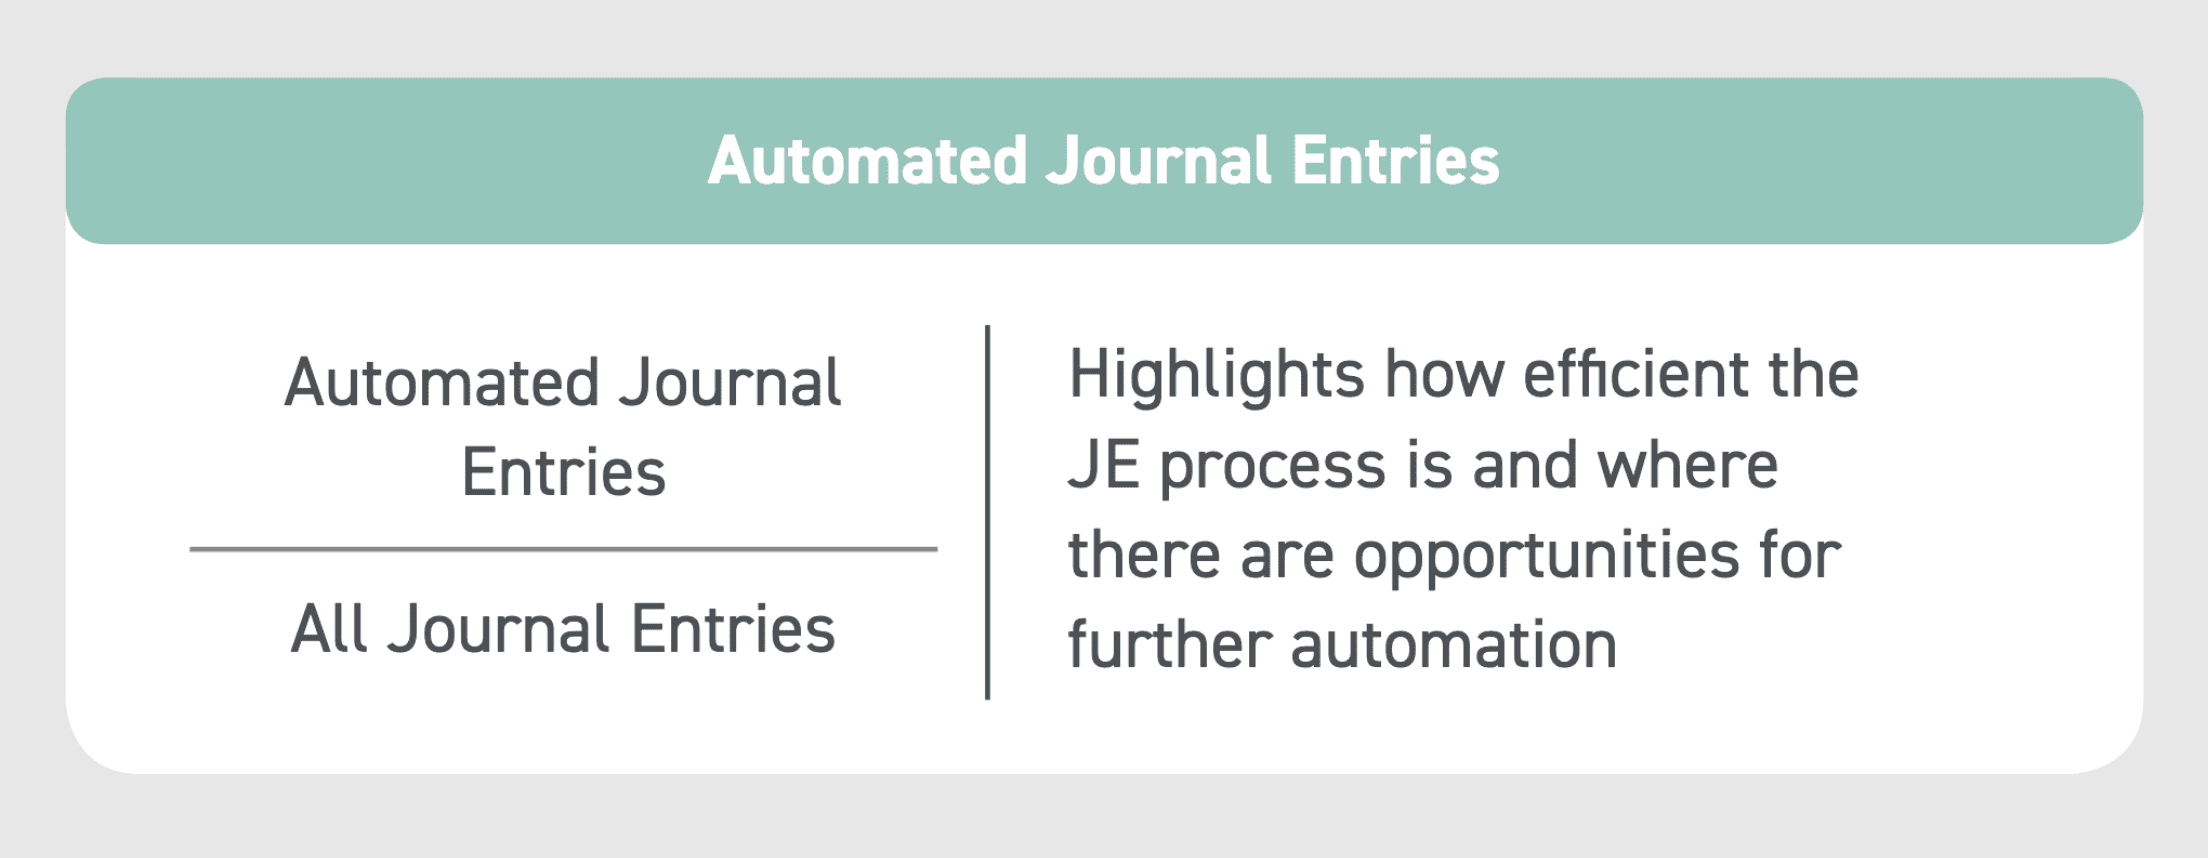 KPI finance and accounting automated journal entries